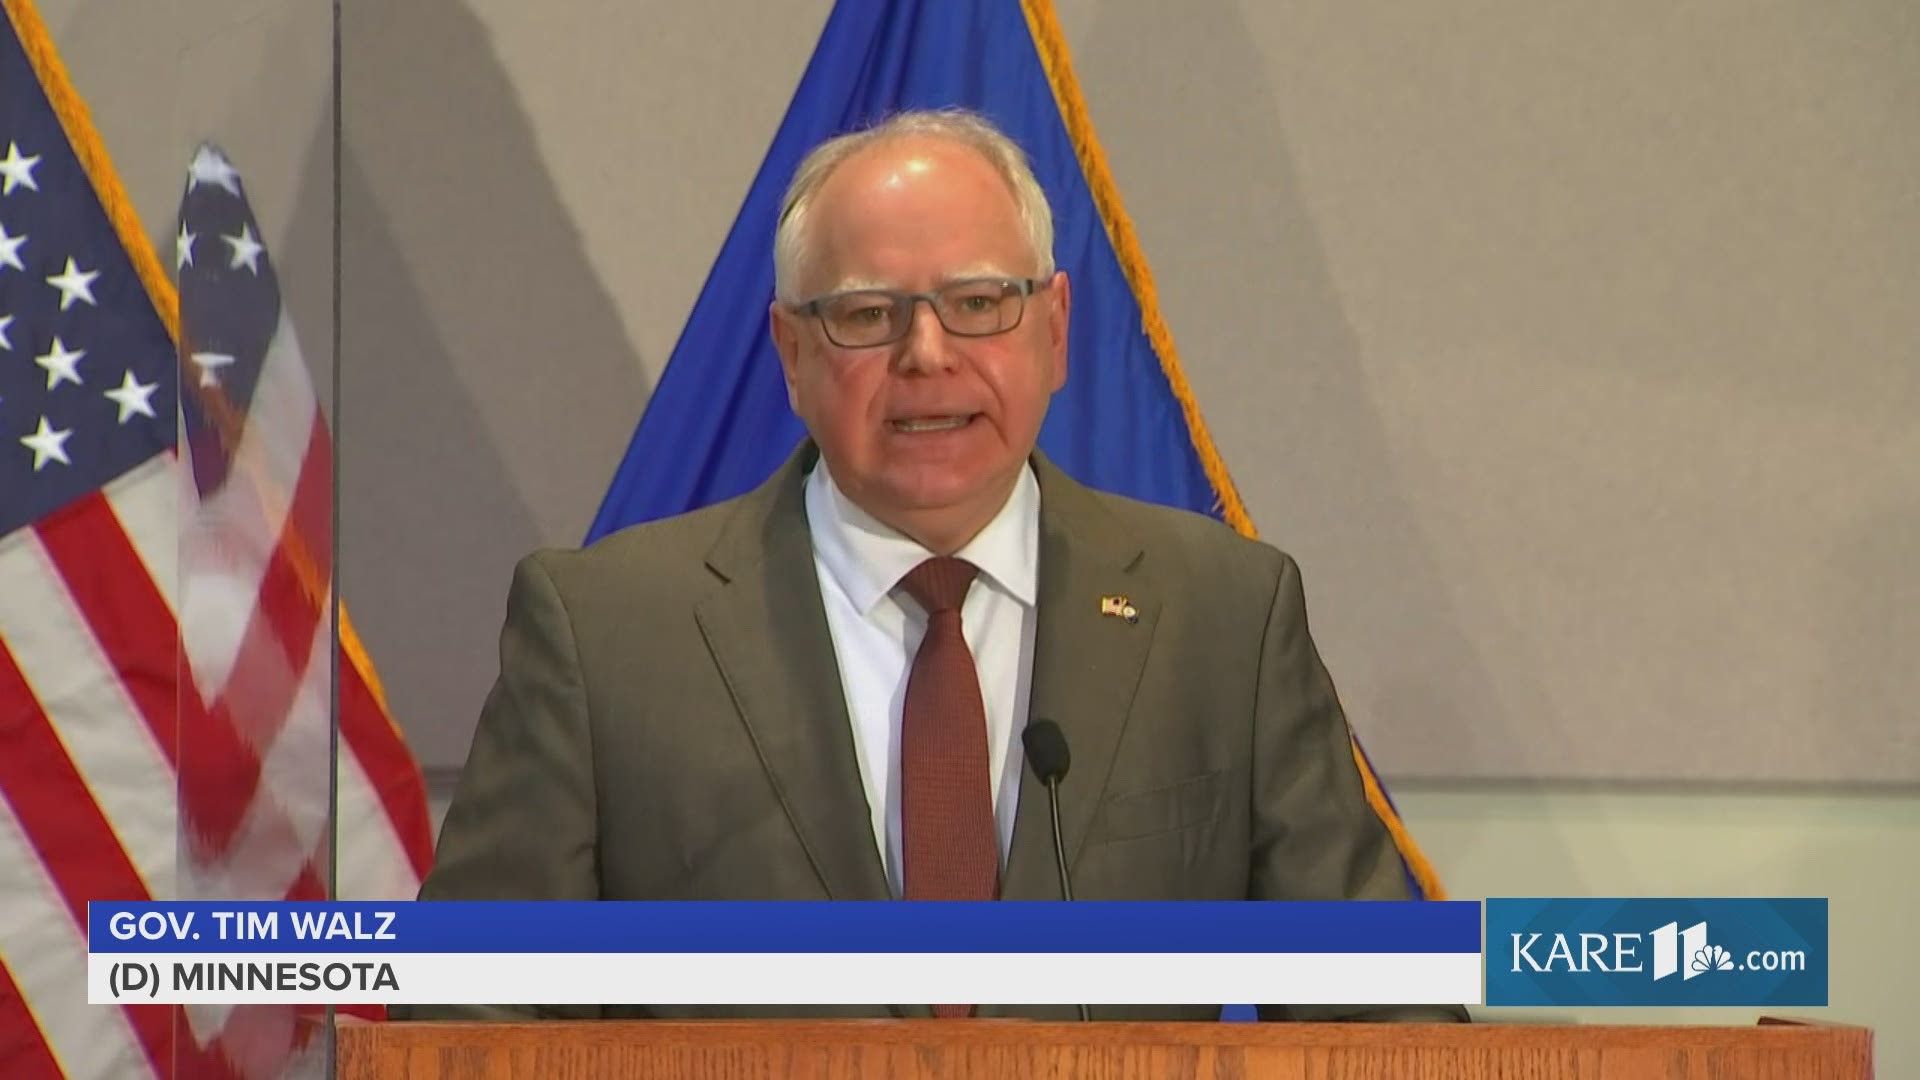 In a briefing to discuss the public safety plan for the Derek Chauvin trial verdict, Governor Tim Walz spoke about racial inequity and the freedom of the press.